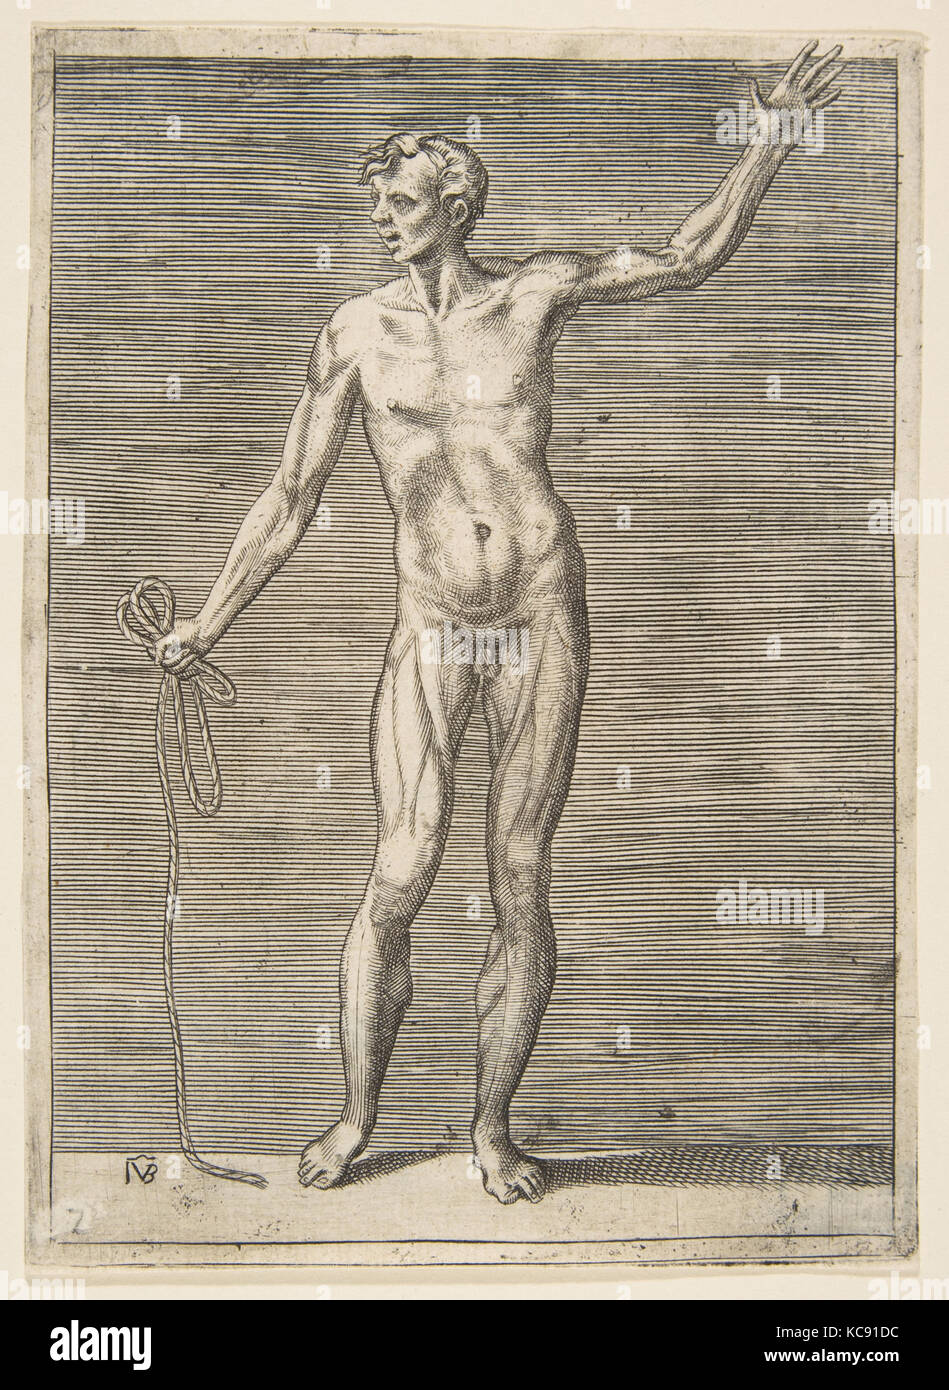 Man seen from the Front, holding a Rope in his right Hand, Giulio Bonasone, 16th century Stock Photo